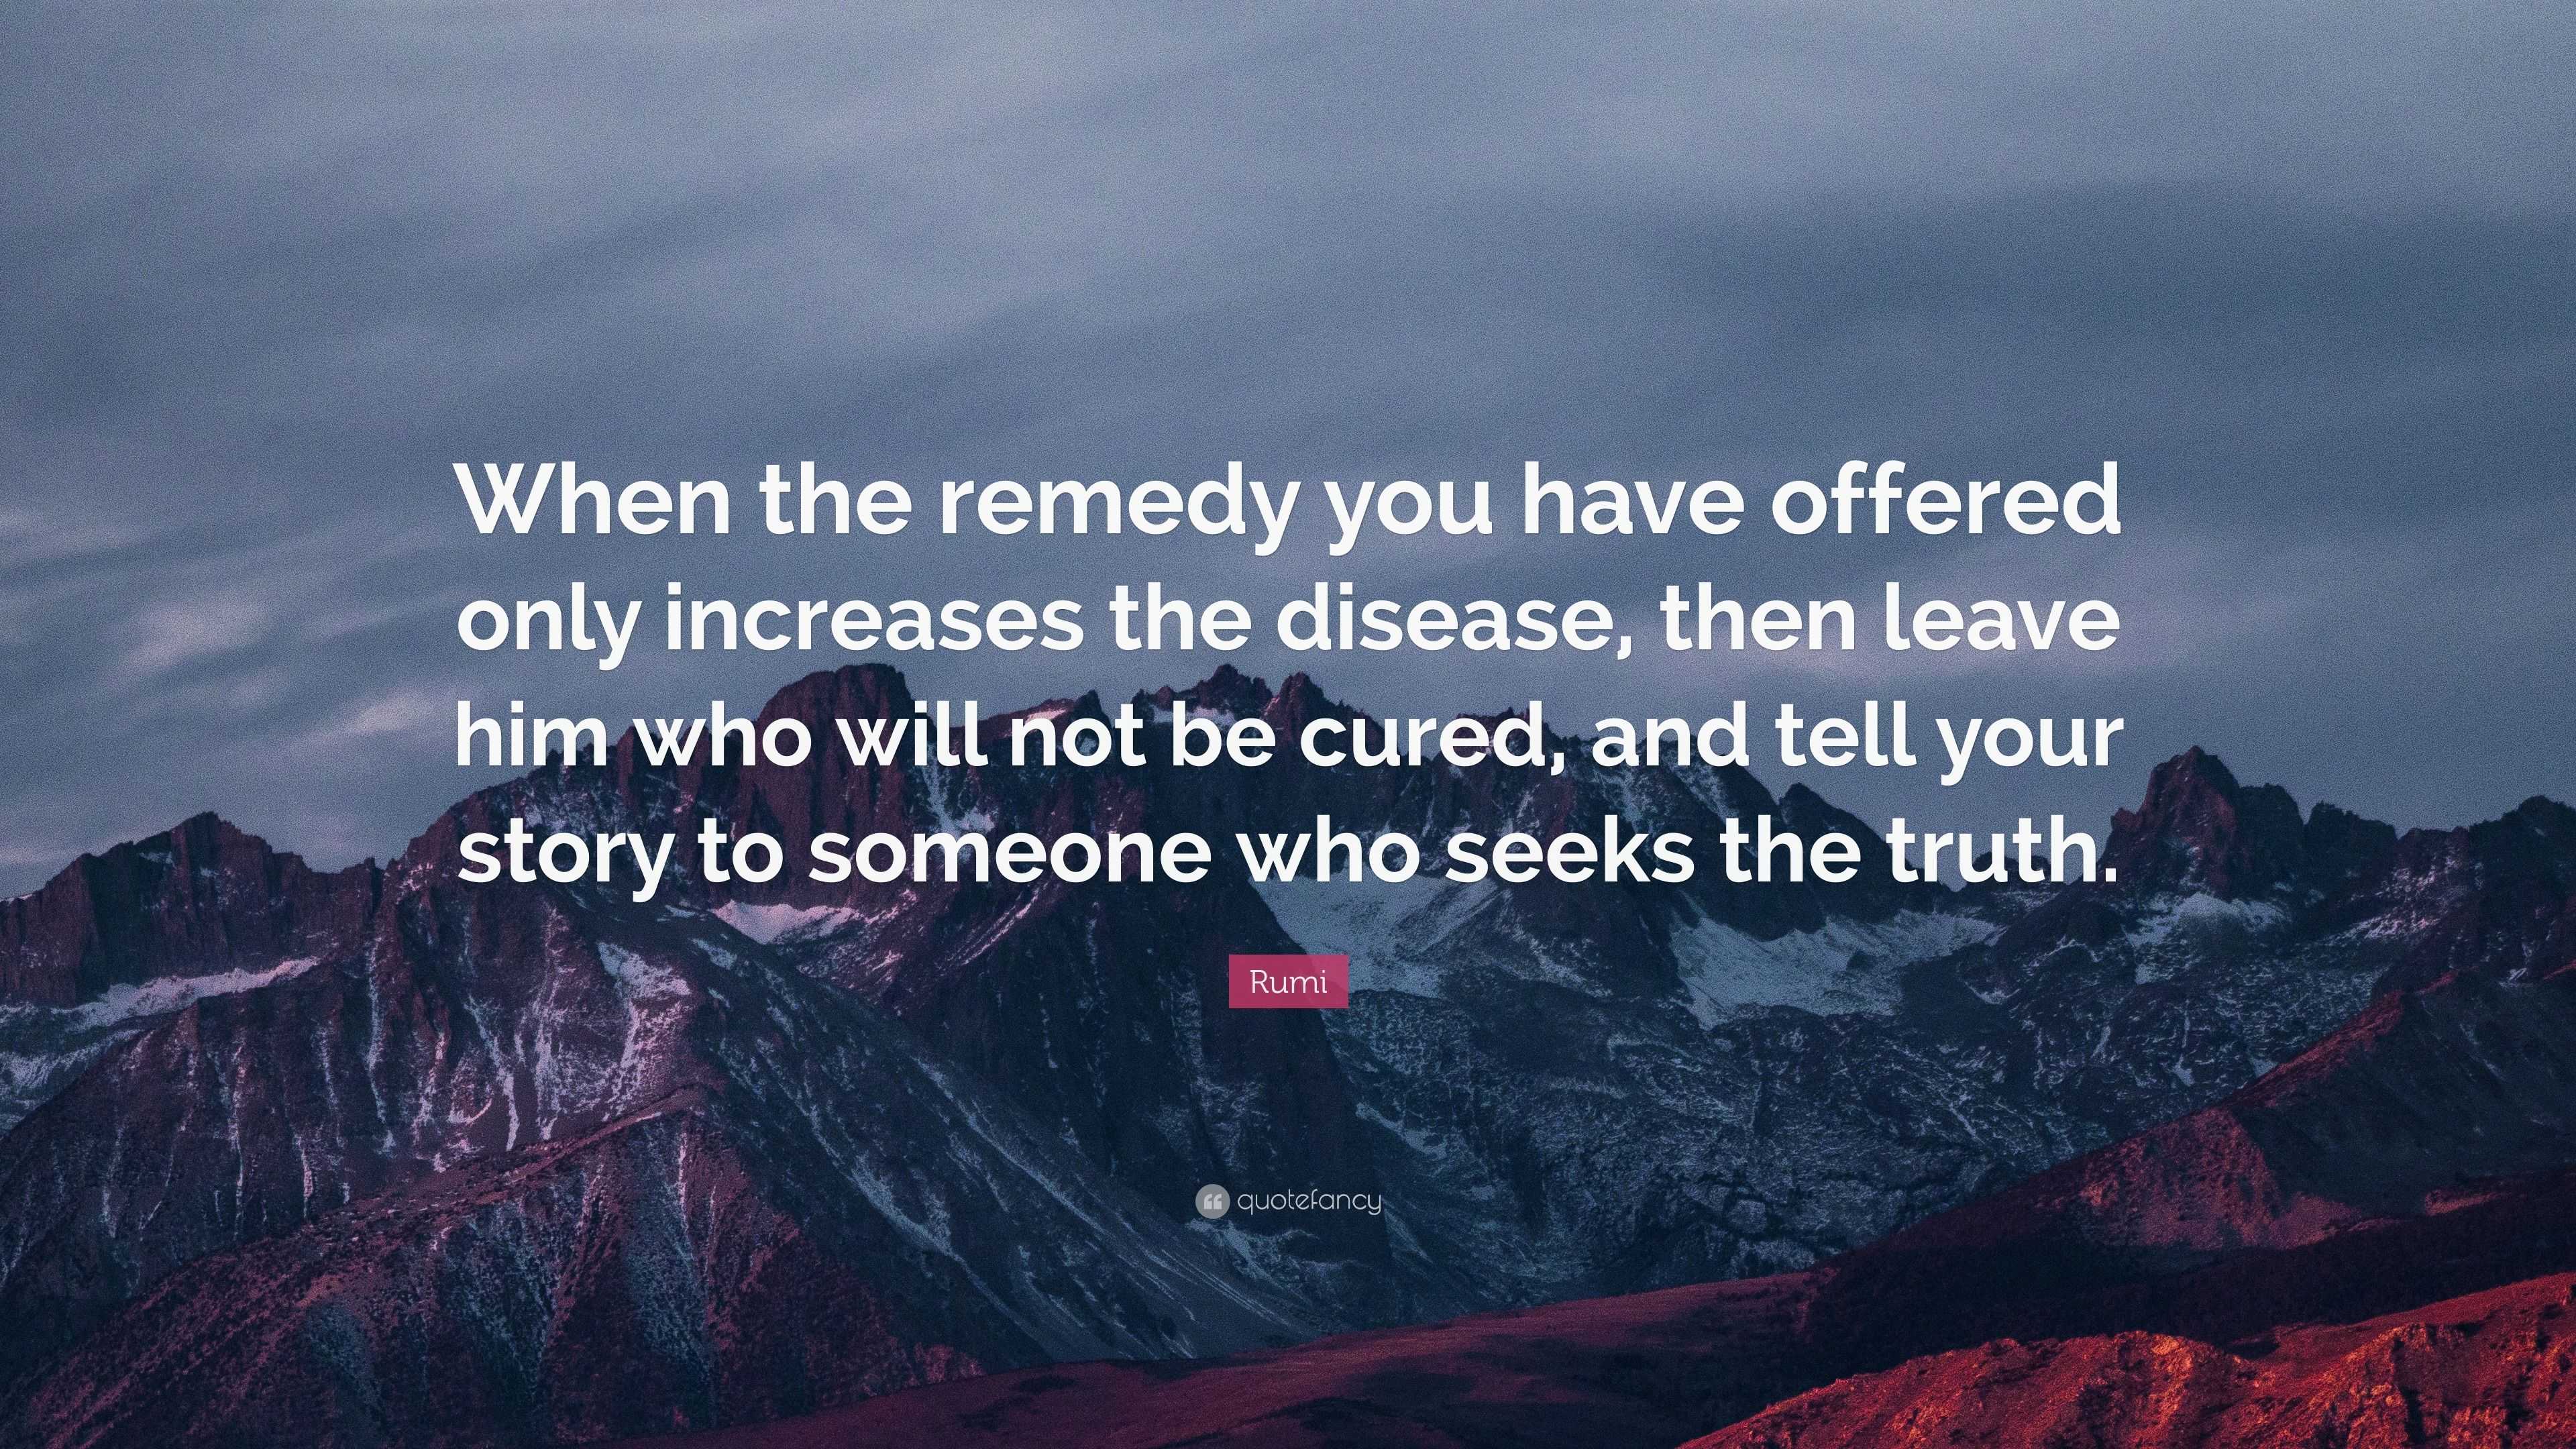 Rumi Quote “When the remedy you have offered only increases the disease then